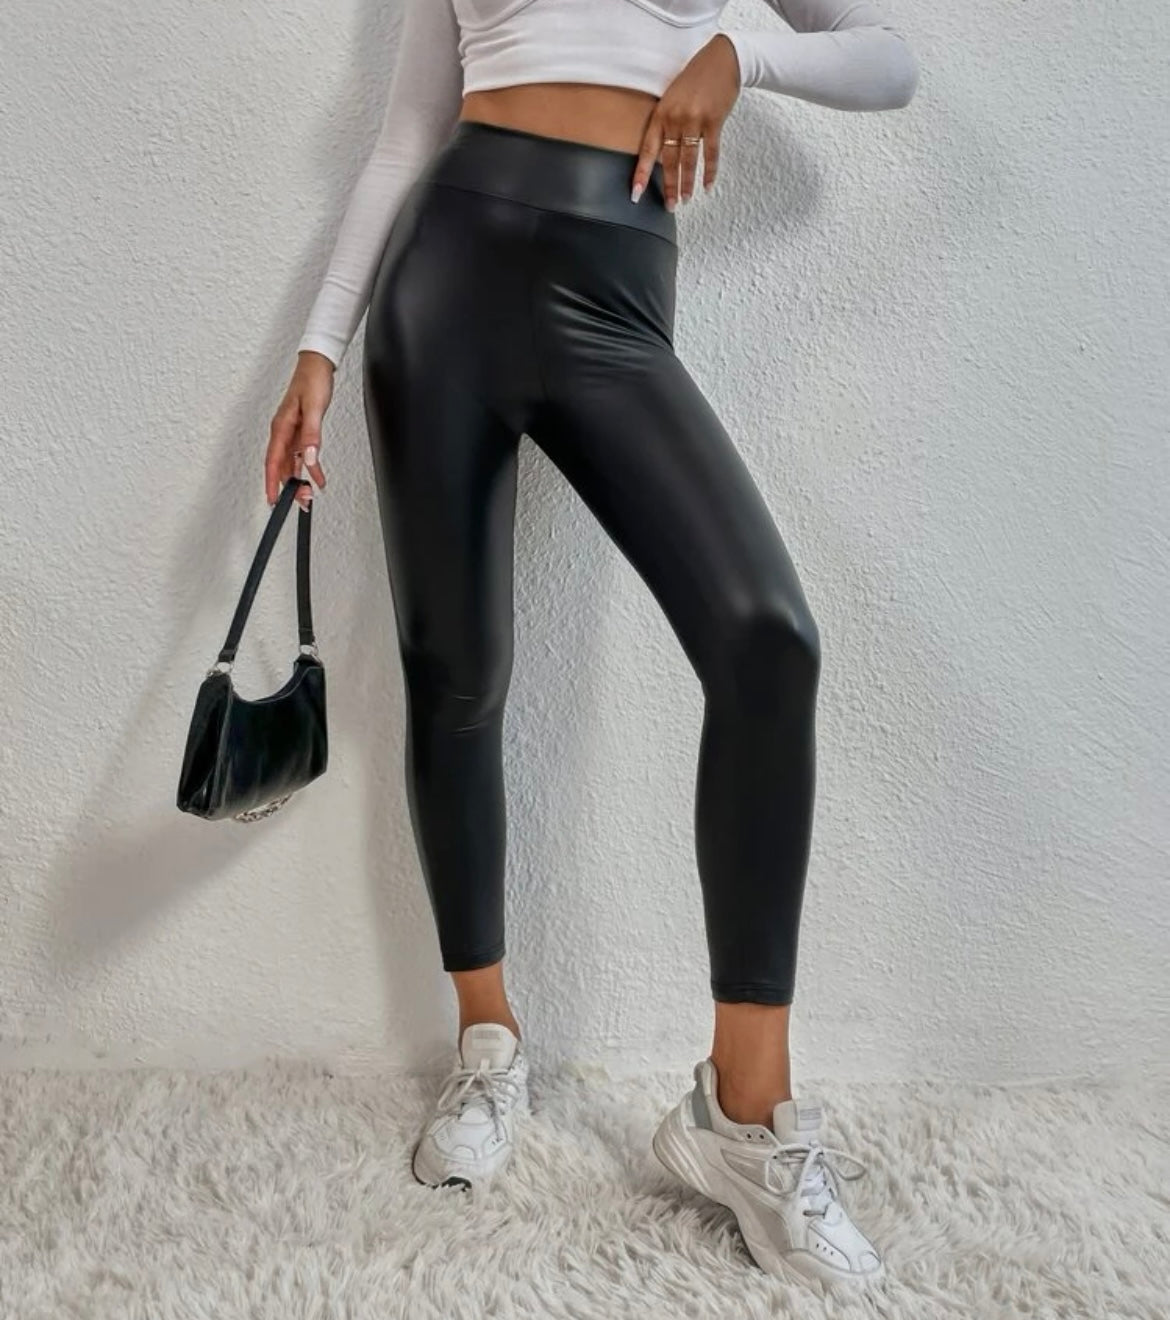 High Waist Black Leather Leggings For Women Perfect For Nightclubs,  Parties, And Casual Wear Fashionable Push Up Design Warm PU Angular  Material Table Style 211117 From Kong01, $12.66